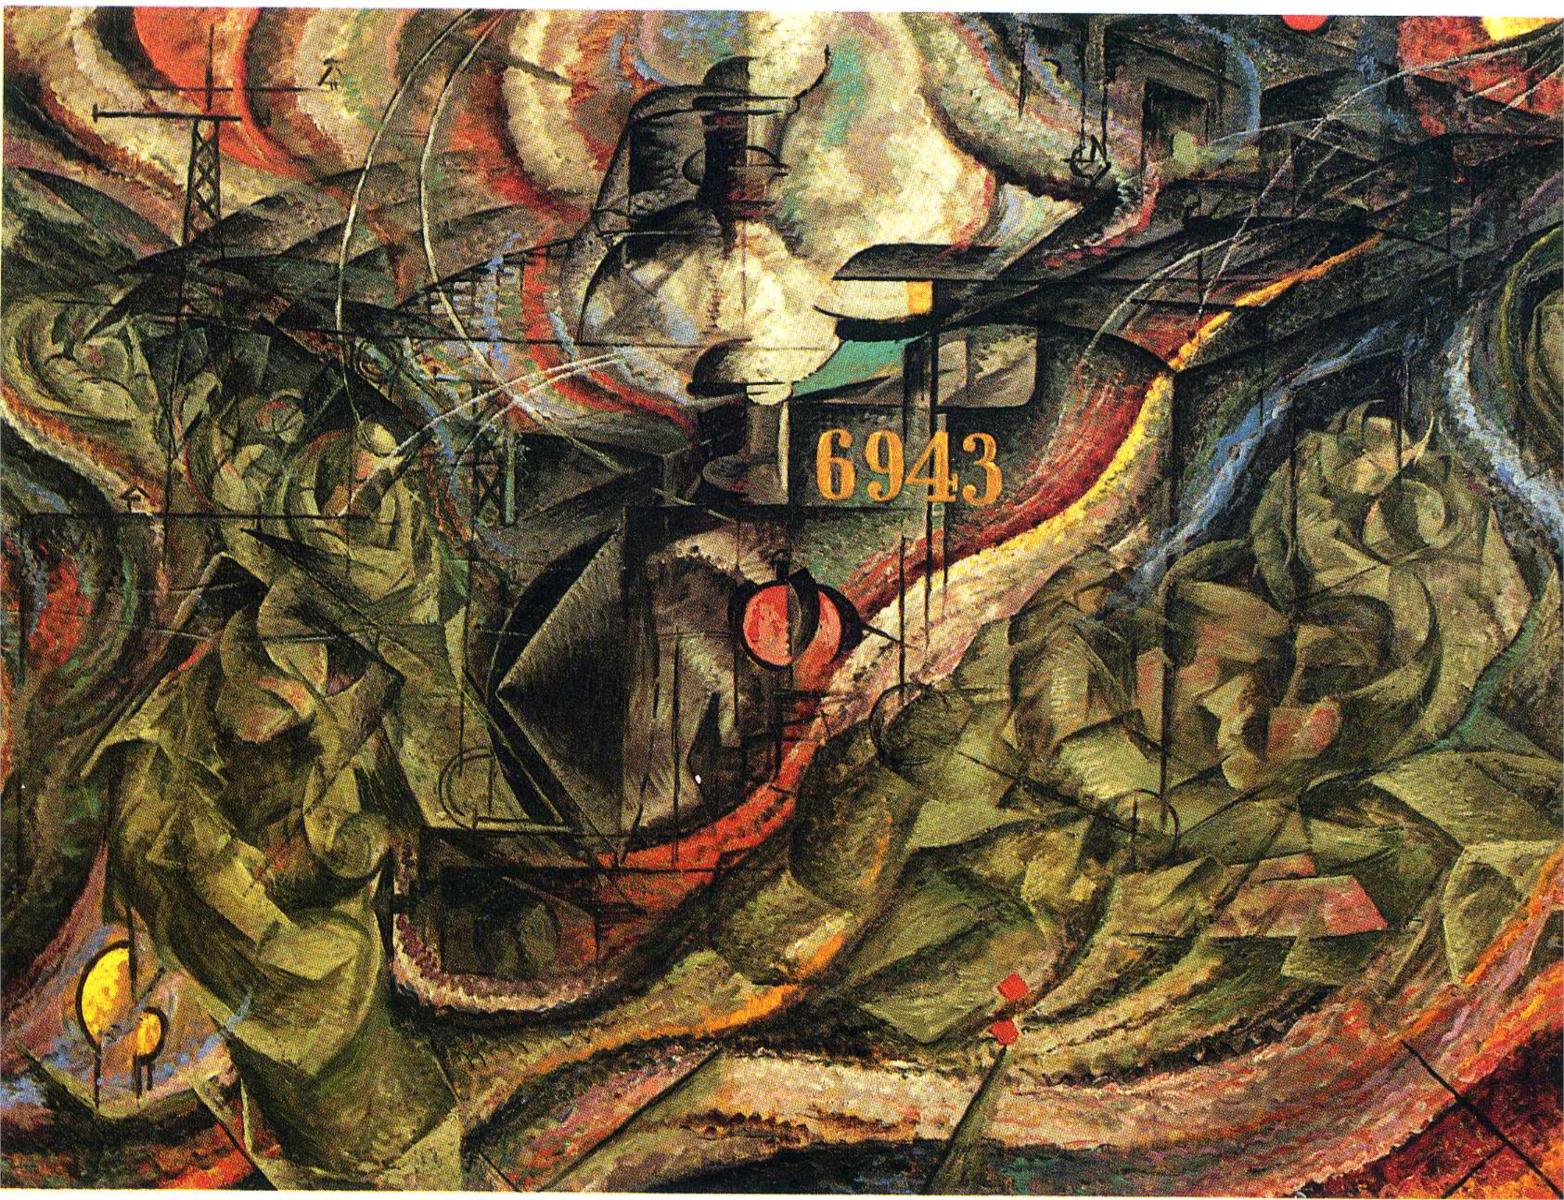 States of Mind I: The Farewells by Umberto Boccioni - 1911 - 70.5 x 96.2 cm Museum of Modern Art